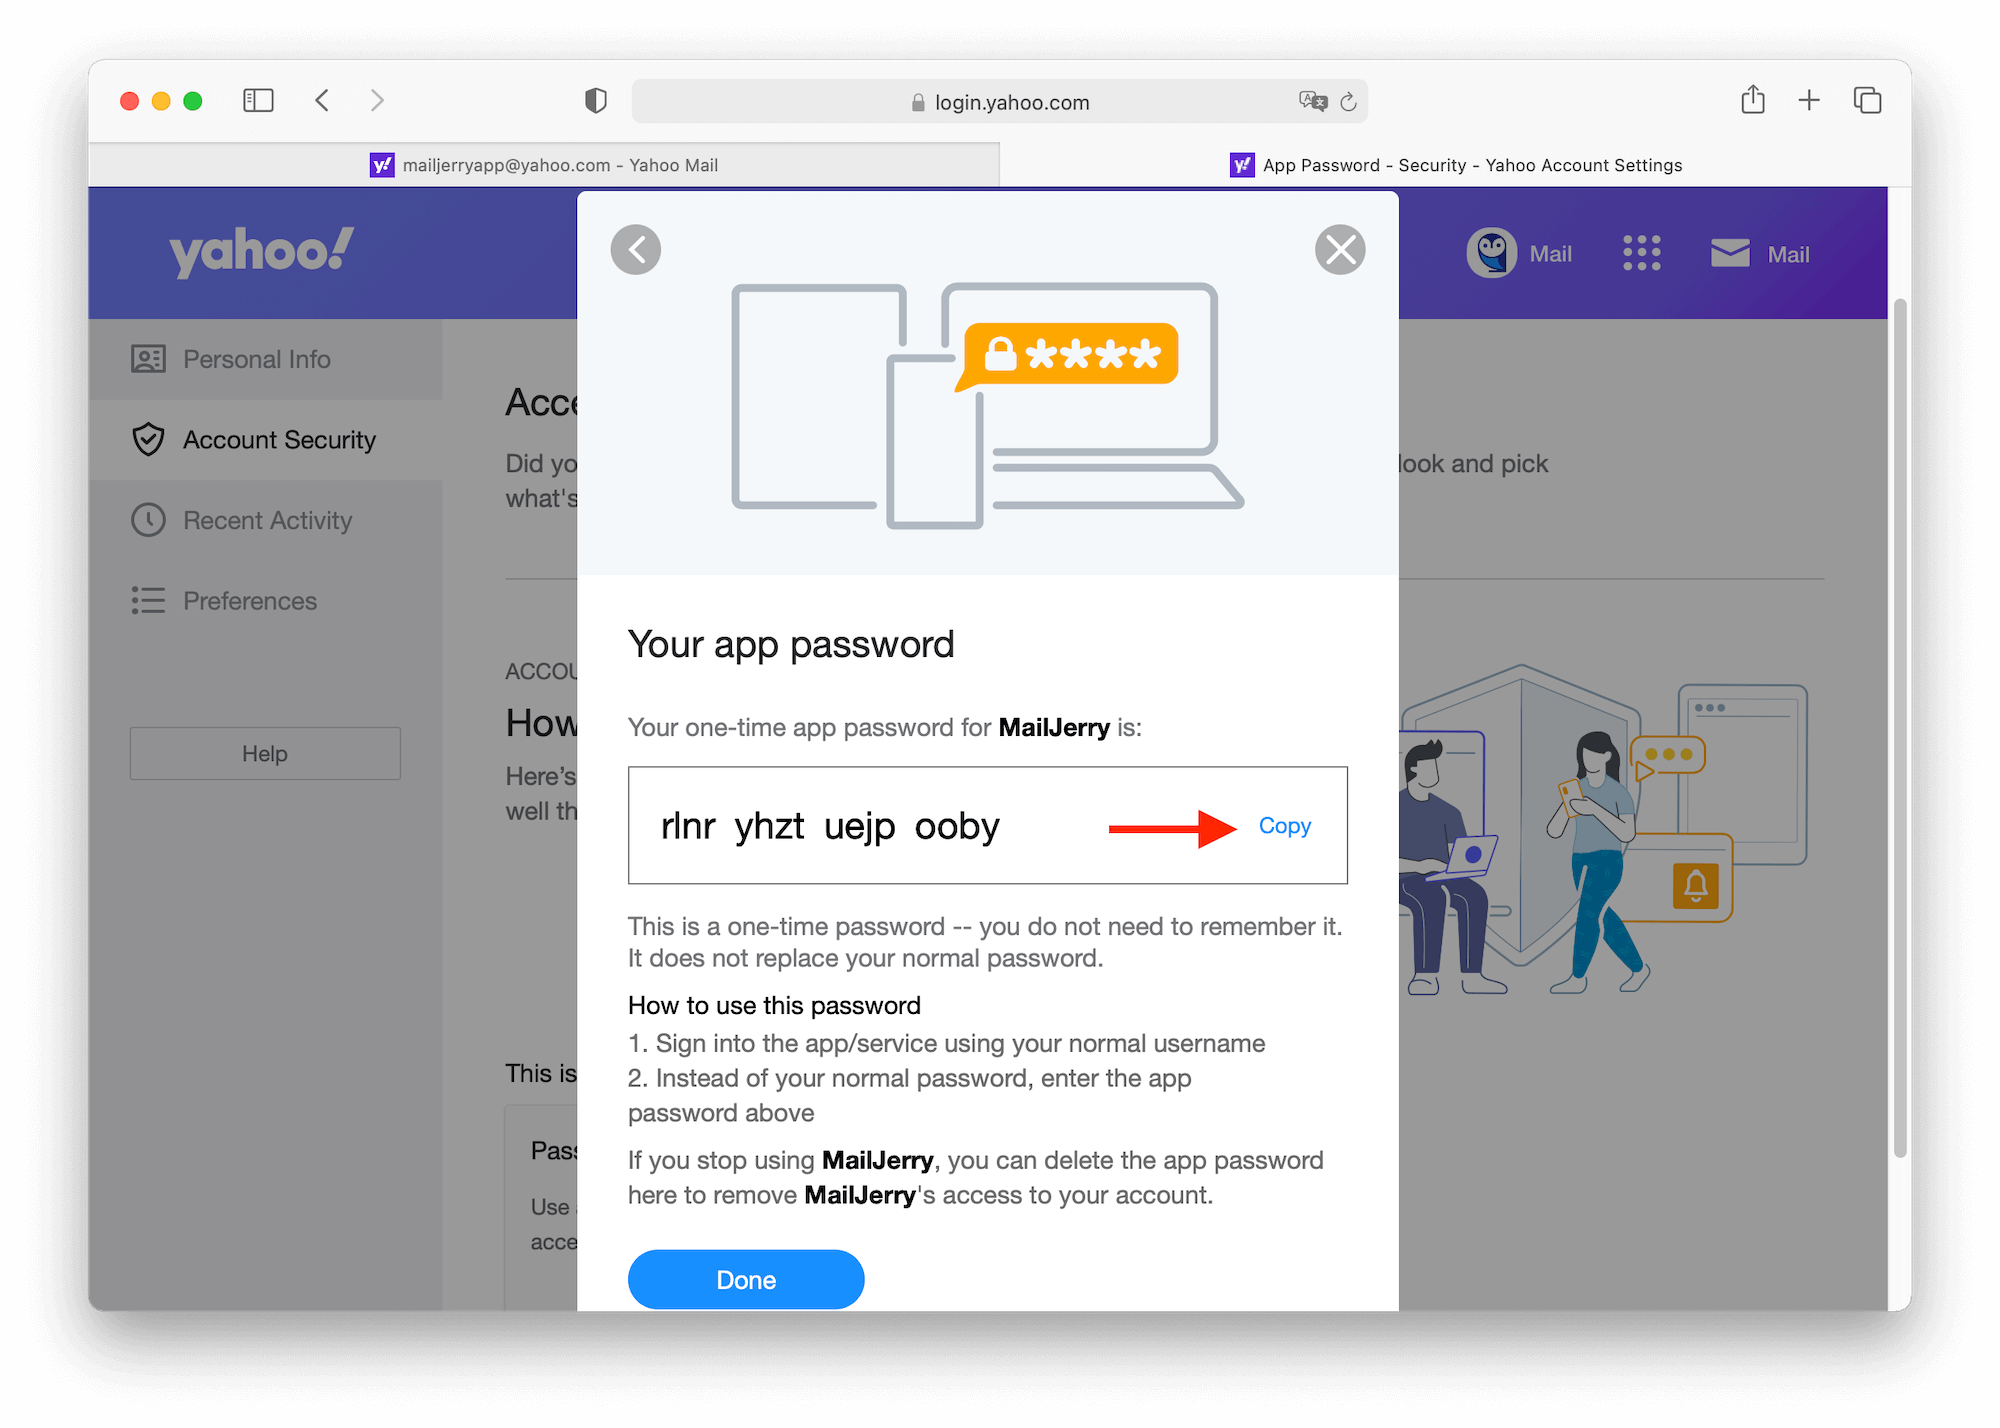 Transfer Yahoo Mail to Gmail: Copy the App Password for Yahoo